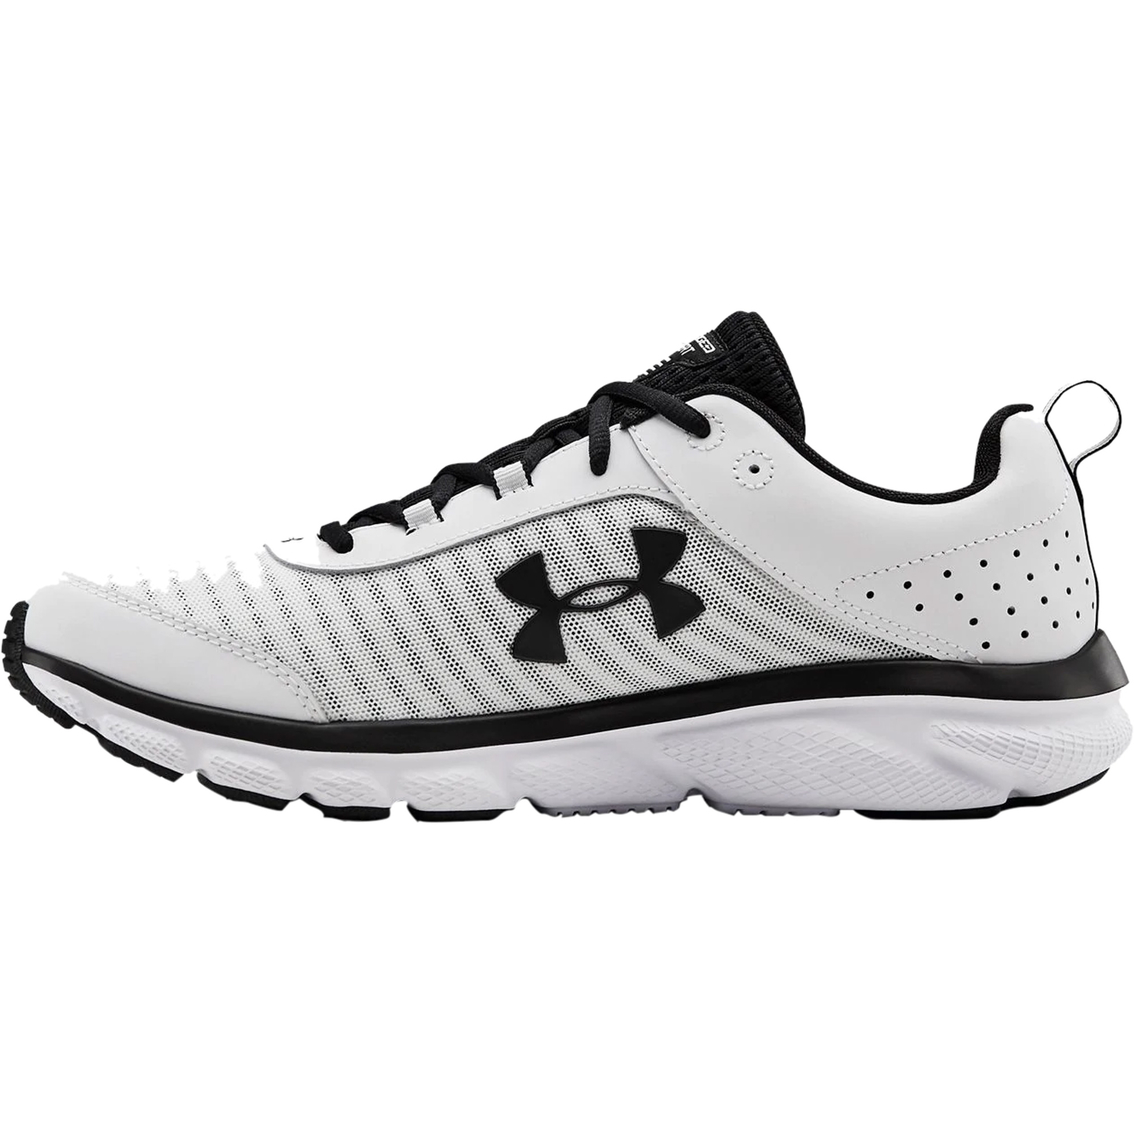 Under Armour Men's Charged Assert Running Shoes, Running, Shoes